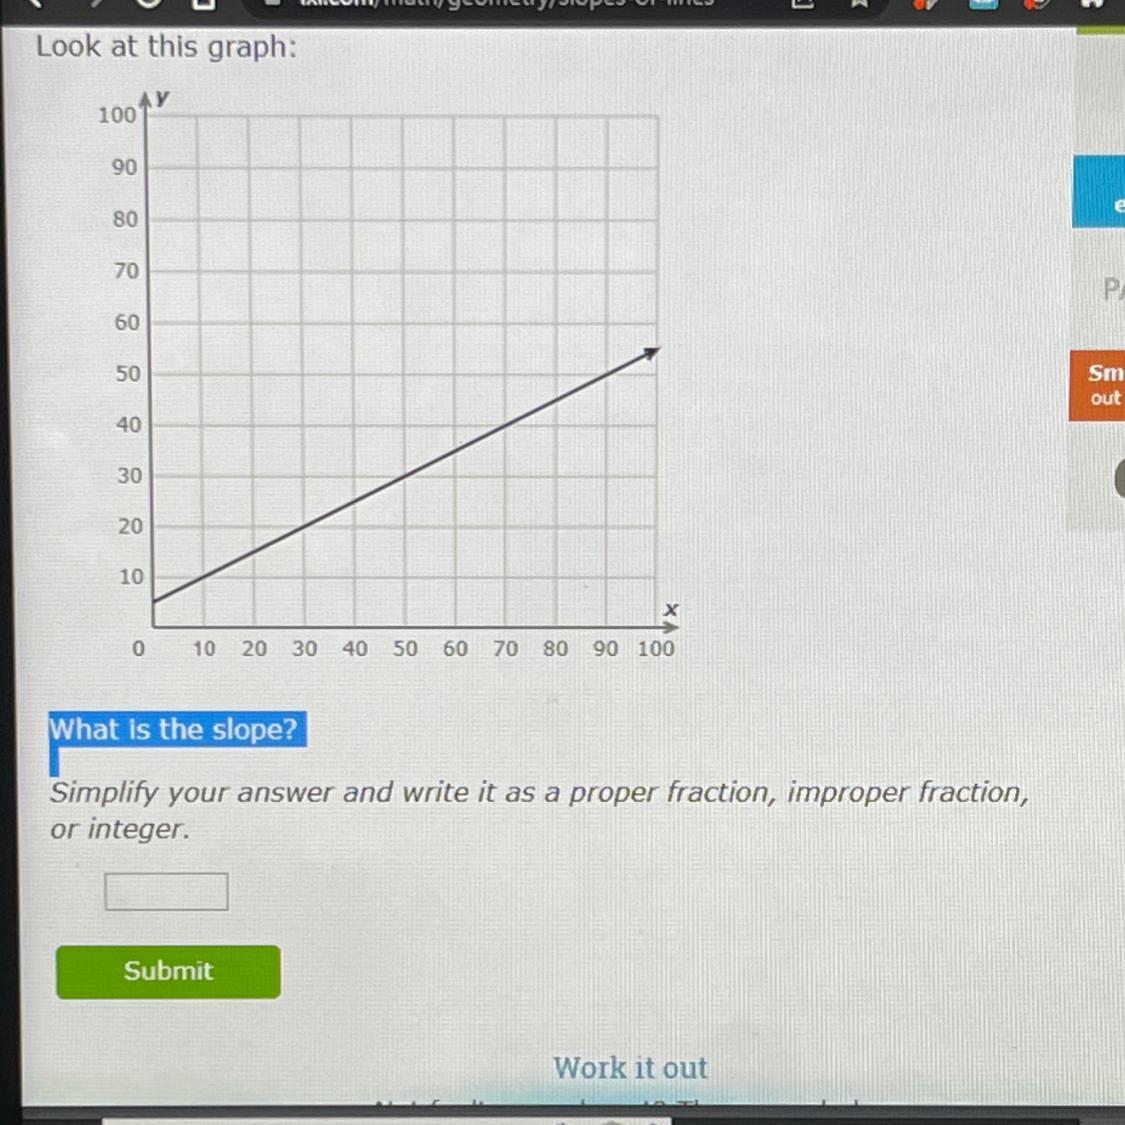 What Is The Slope?Simplify Your Answer And Write It As A Proper Fraction, Improper Fraction, Or Integer